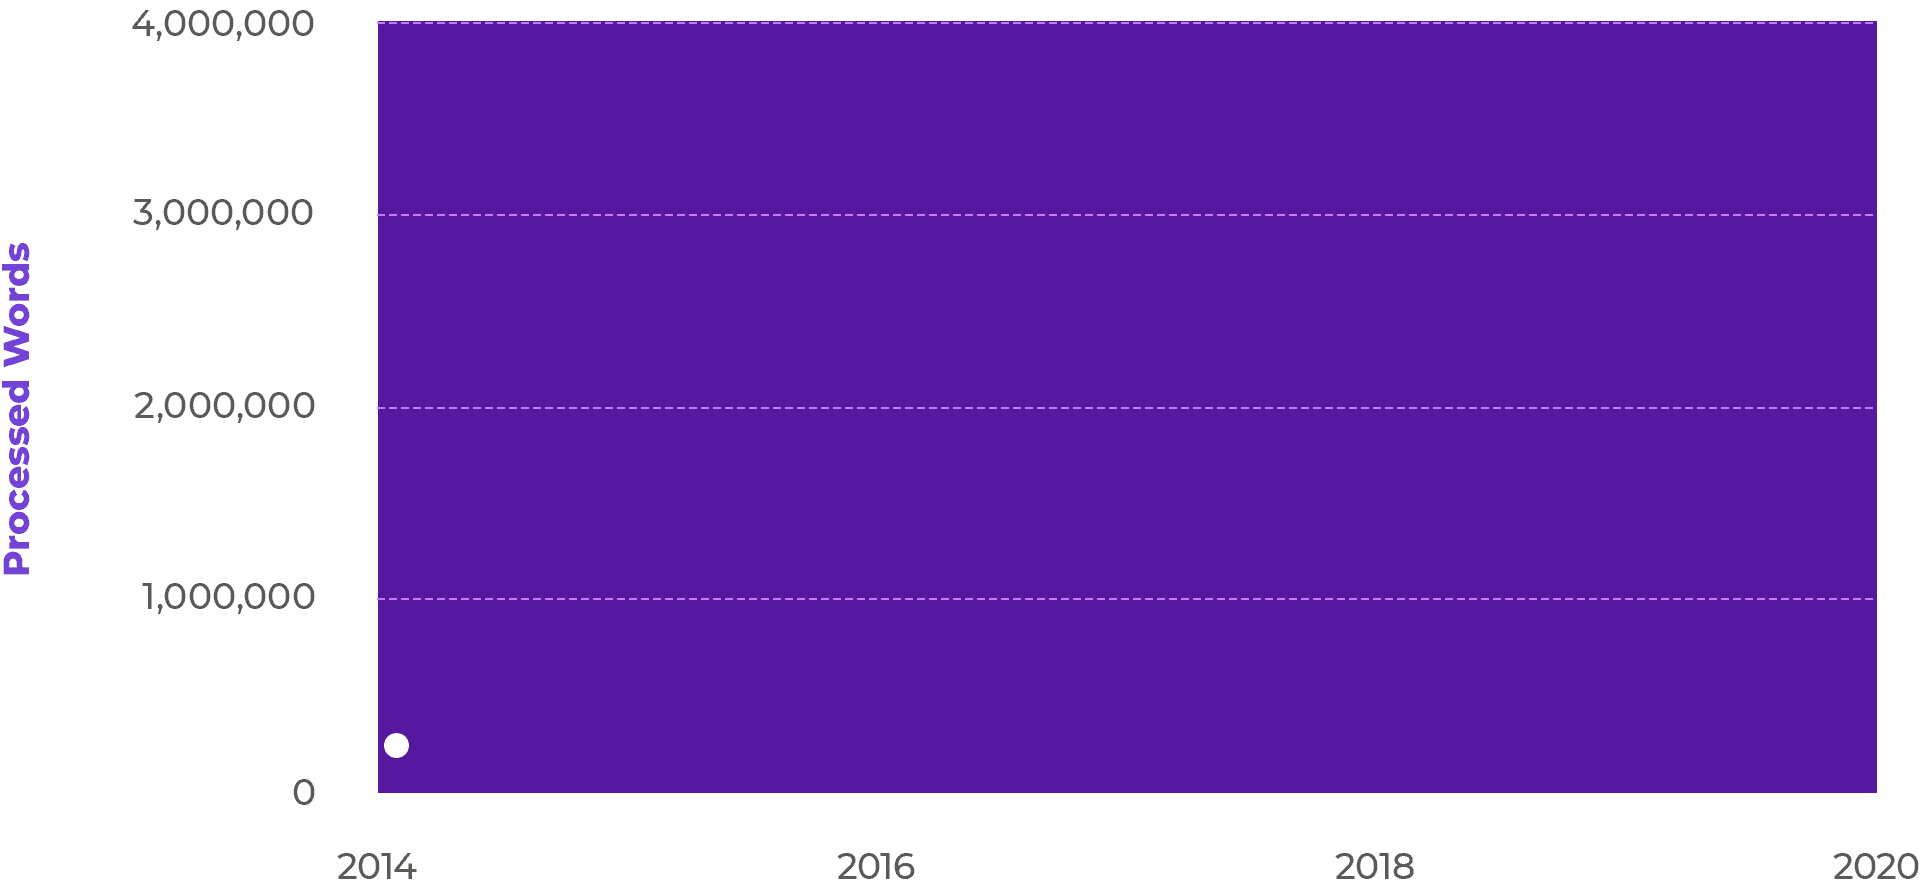 graph of Yext's Translation Volume Year-Over-Year -- under 1 million to 3 million from 2014 to 2020